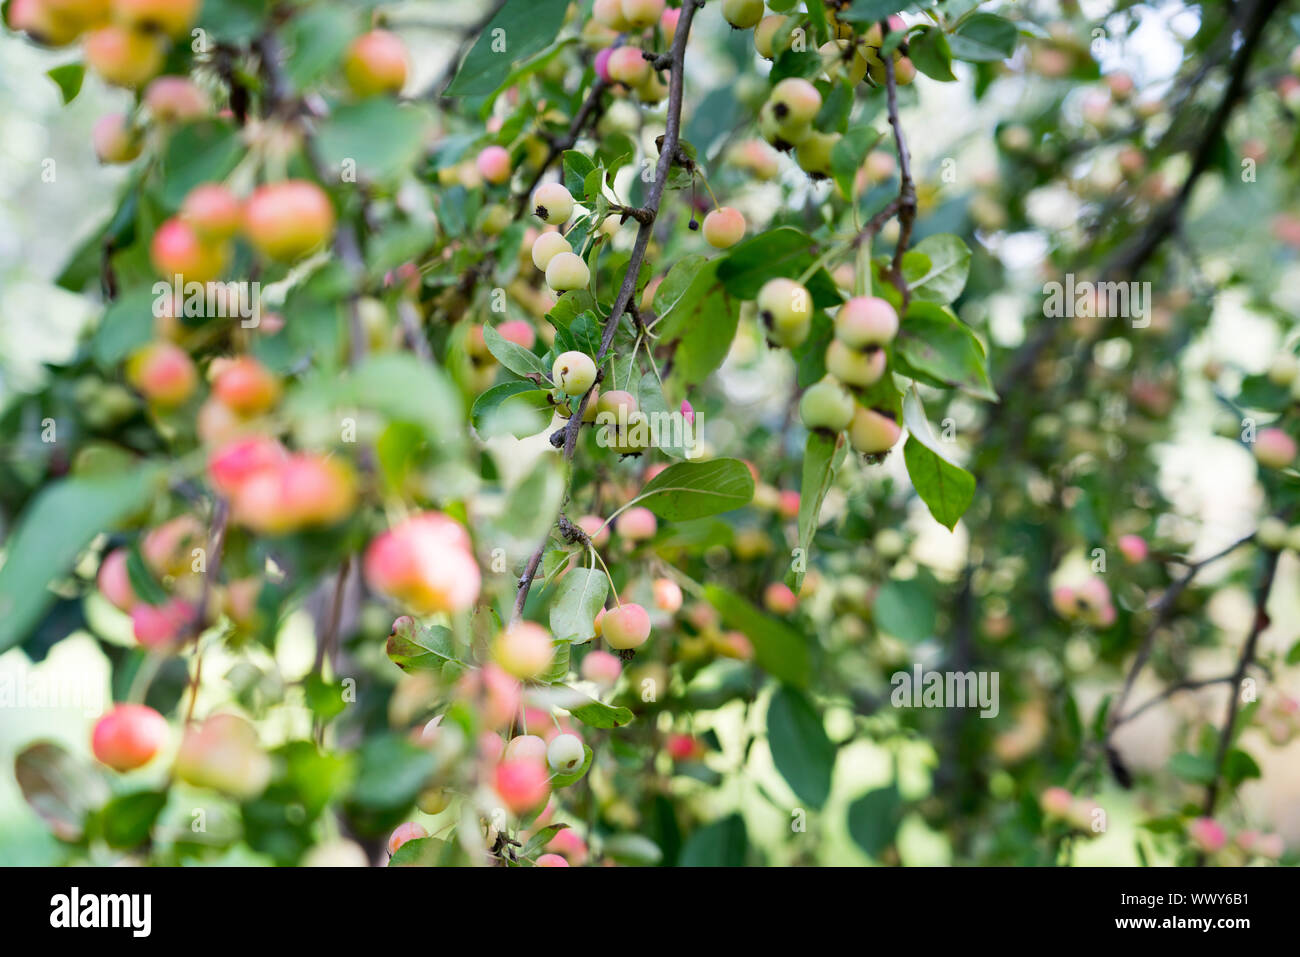 Decorative apples in autumn, Ornamental Apples, Germany, Europe Stock Photo